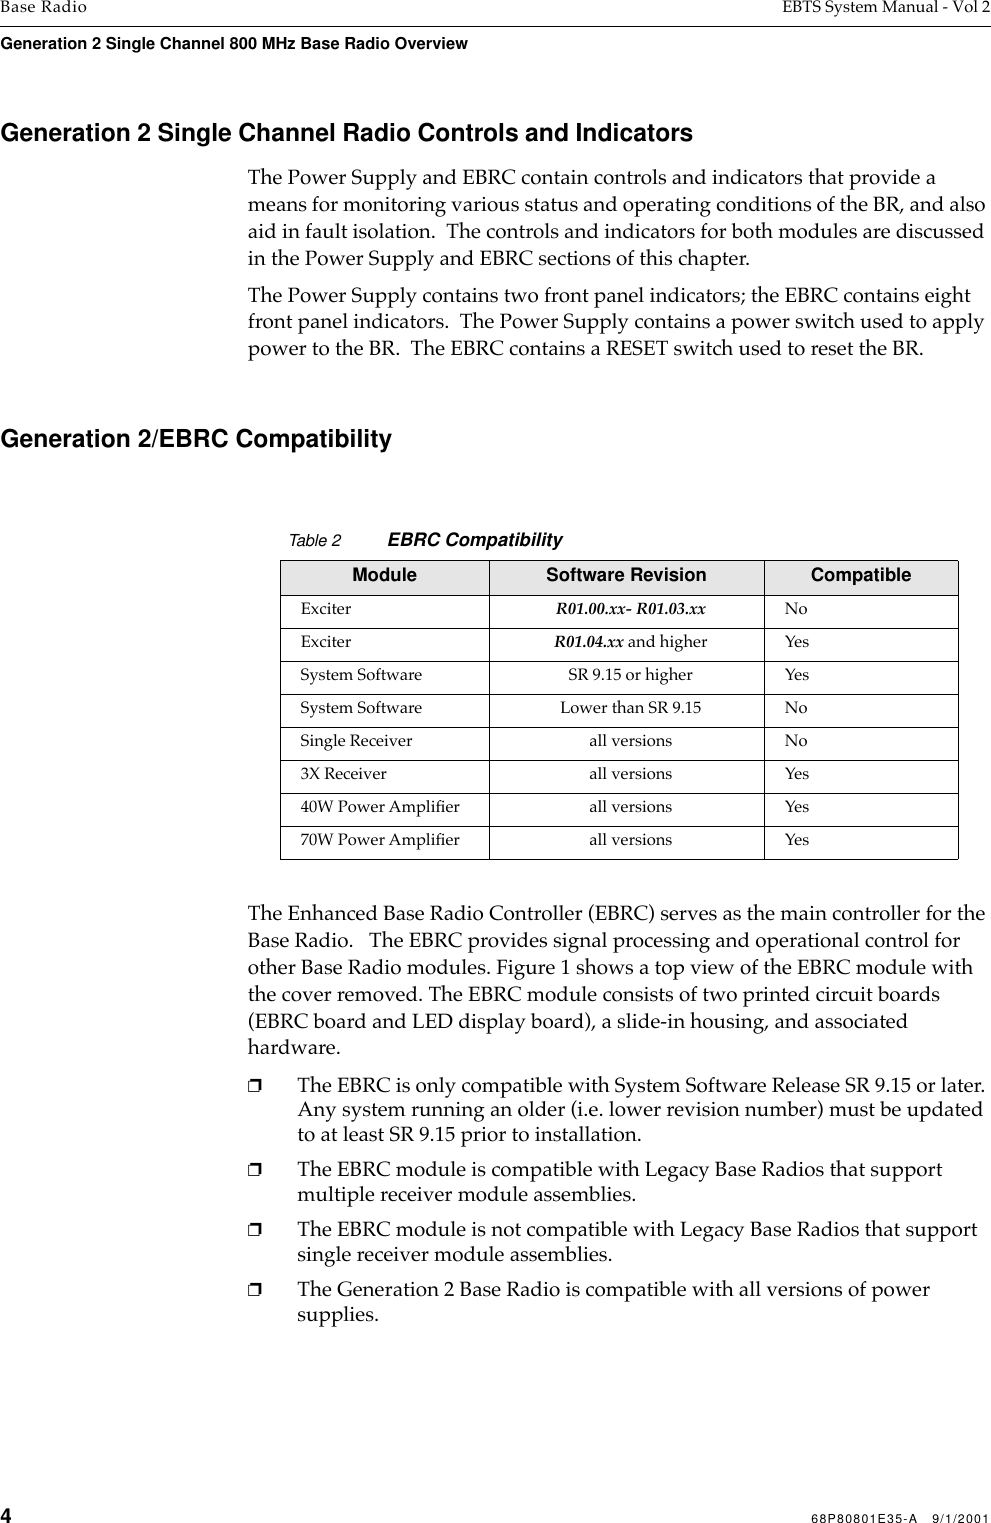 468P80801E35-A   9/1/2001Base Radio EBTS System Manual - Vol 2Generation 2 Single Channel 800 MHz Base Radio Overview Generation 2 Single Channel Radio Controls and IndicatorsThe Power Supply and EBRC contain controls and indicators that provide a means for monitoring various status and operating conditions of the BR, and also aid in fault isolation.  The controls and indicators for both modules are discussed in the Power Supply and EBRC sections of this chapter.The Power Supply contains two front panel indicators; the EBRC contains eight front panel indicators.  The Power Supply contains a power switch used to apply power to the BR.  The EBRC contains a RESET switch used to reset the BR. Generation 2/EBRC CompatibilityThe Enhanced Base Radio Controller (EBRC) serves as the main controller for the Base Radio.   The EBRC provides signal processing and operational control for other Base Radio modules. Figure 1 shows a top view of the EBRC module with the cover removed. The EBRC module consists of two printed circuit boards (EBRC board and LED display board), a slide-in housing, and associated hardware.❐The EBRC is only compatible with System Software Release SR 9.15 or later. Any system running an older (i.e. lower revision number) must be updated to at least SR 9.15 prior to installation.❐The EBRC module is compatible with Legacy Base Radios that support multiple receiver module assemblies.❐The EBRC module is not compatible with Legacy Base Radios that support single receiver module assemblies.❐The Generation 2 Base Radio is compatible with all versions of power supplies.Table 2 EBRC CompatibilityModule Software Revision Compatible Exciter R01.00.xx- R01.03.xx NoExciter R01.04.xx and higher YesSystem Software SR 9.15 or higher YesSystem Software Lower than SR 9.15 NoSingle Receiver all versions No3X Receiver all versions Yes40W Power Ampliﬁer all versions Yes70W Power Ampliﬁer all versions Yes